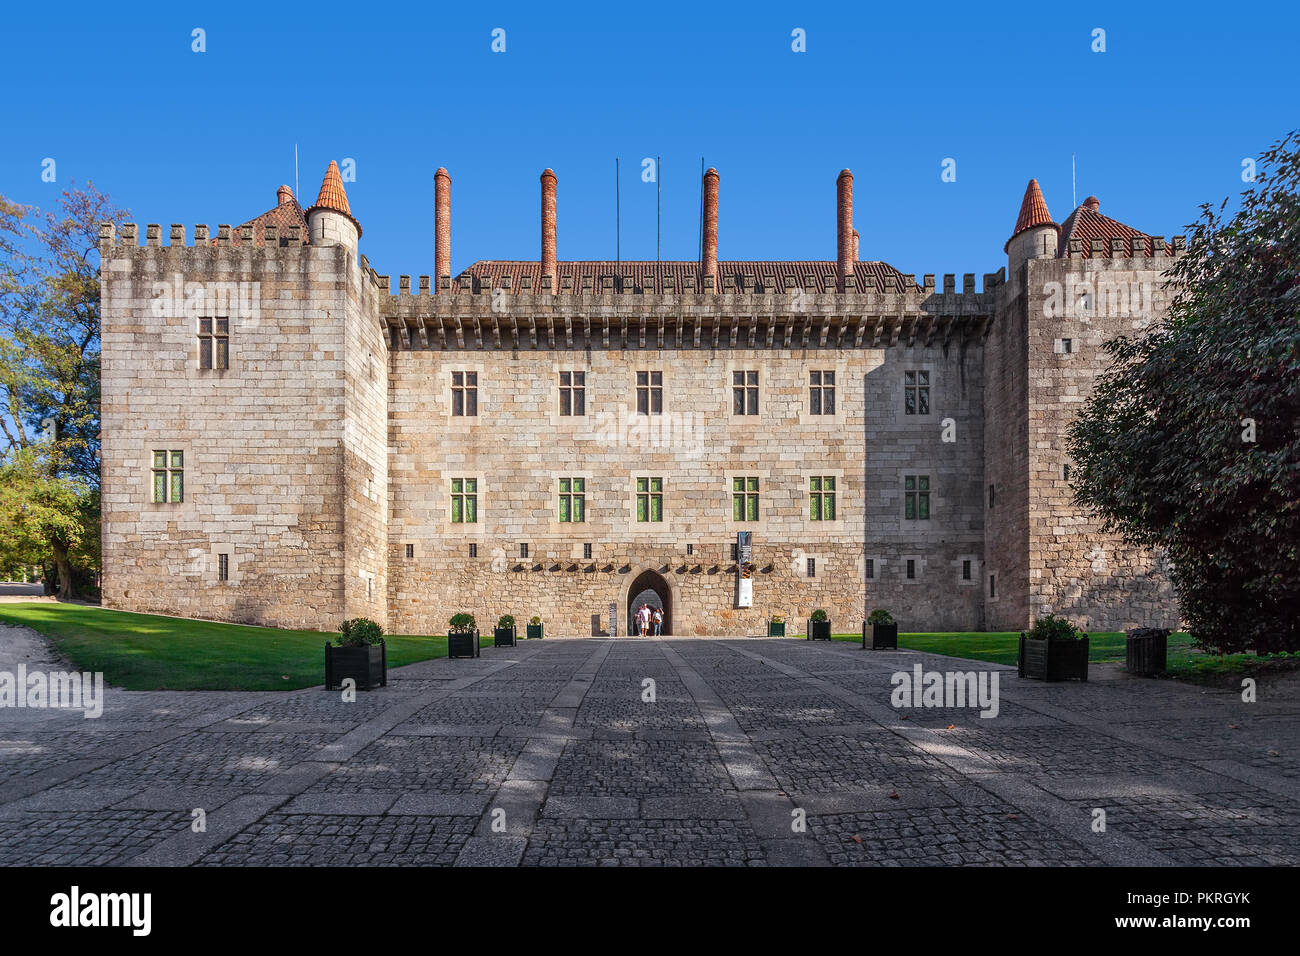 Guimaraes, Portugal - October 13, 2017: Palace of the Duques of Braganca, a medieval palace and museum in Guimaraes, Portugal - Unesco World Heritage  Stock Photo